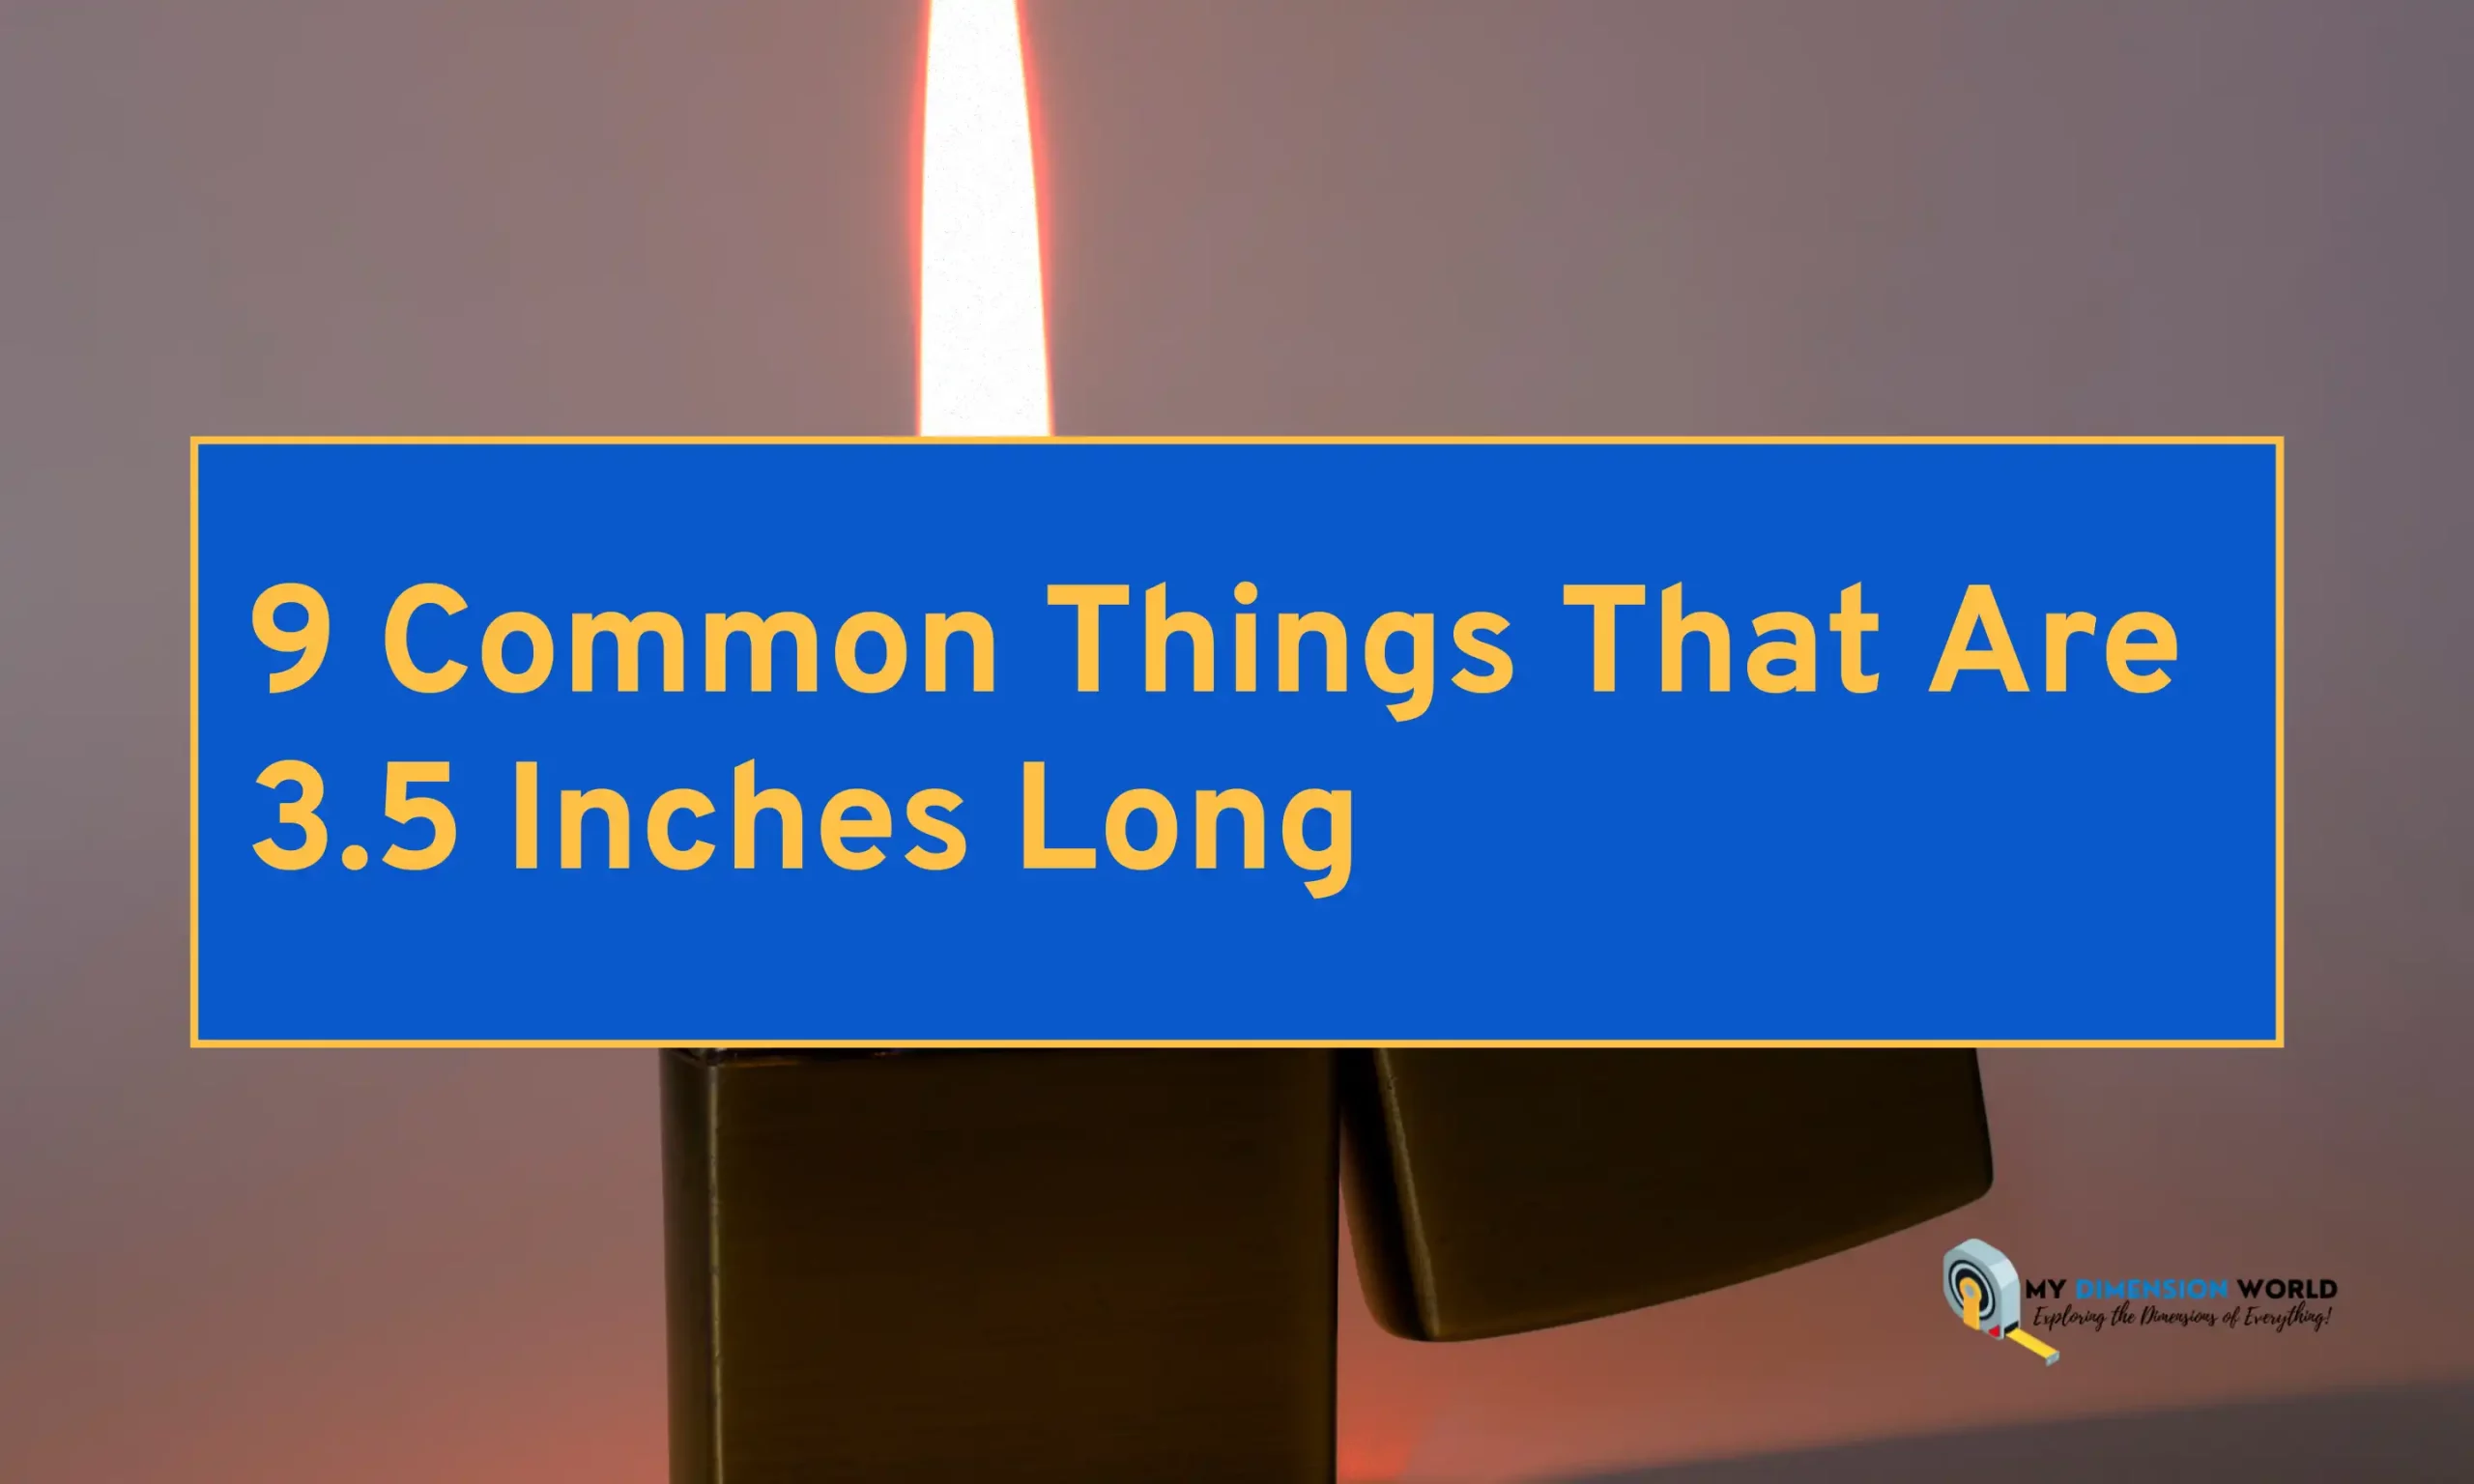 9 Common Things That Are 3.5 Inches Long